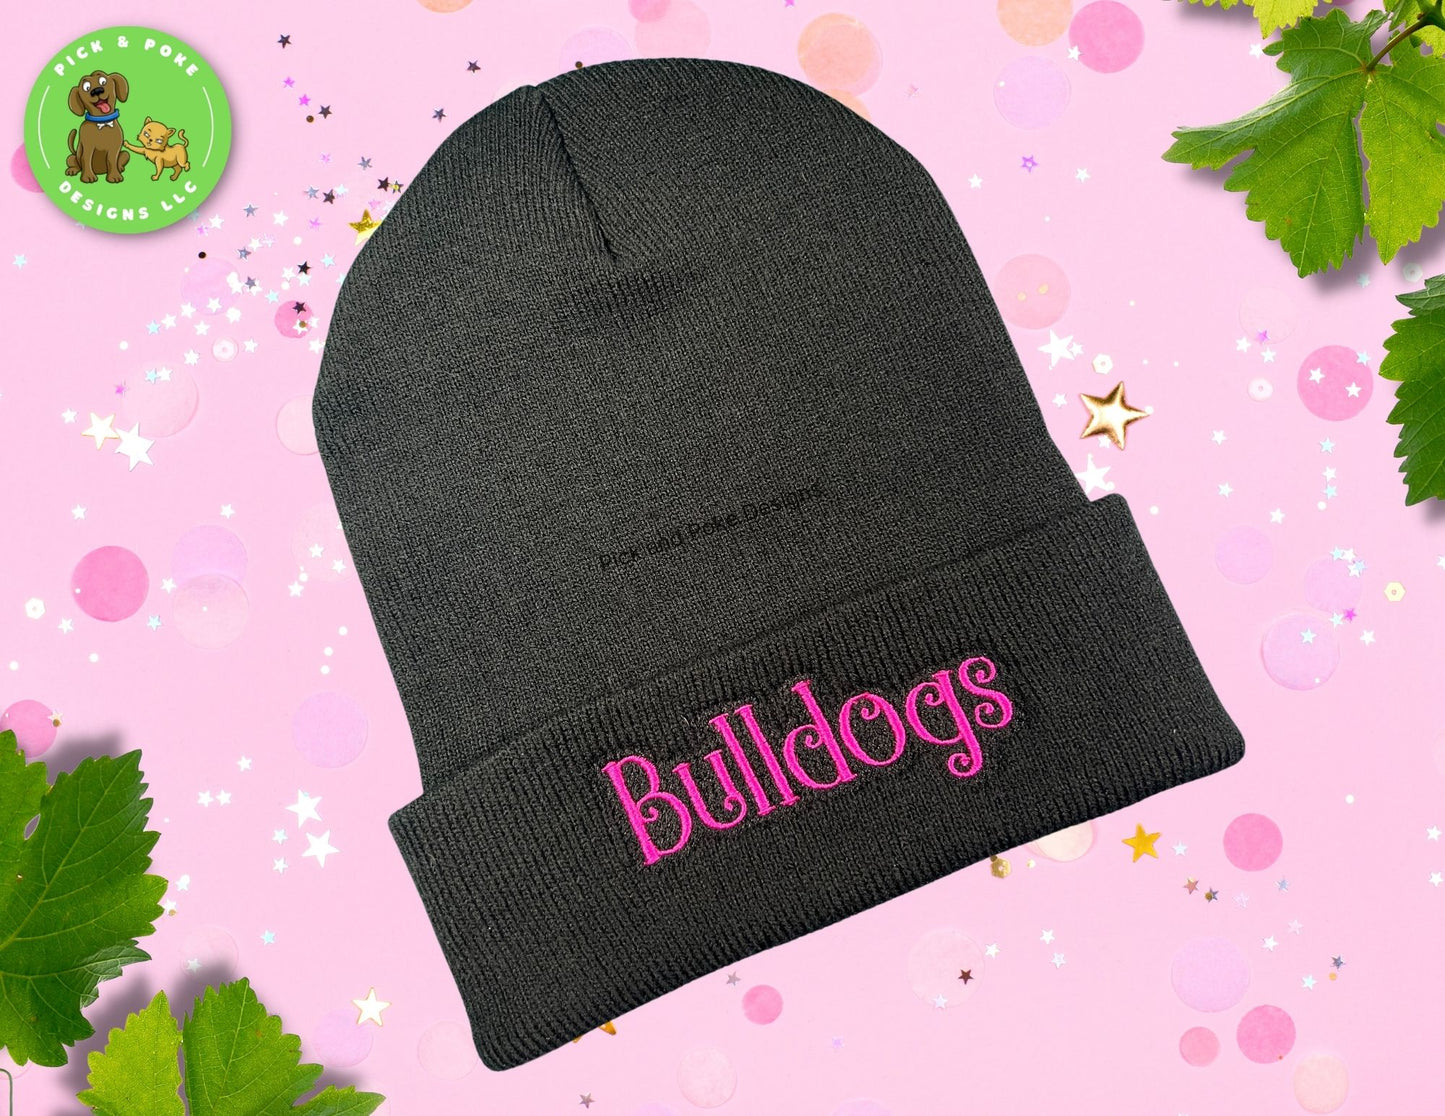 Personalized School Mascot Beanie Cap | Black Knit Hat with Embroidered Text